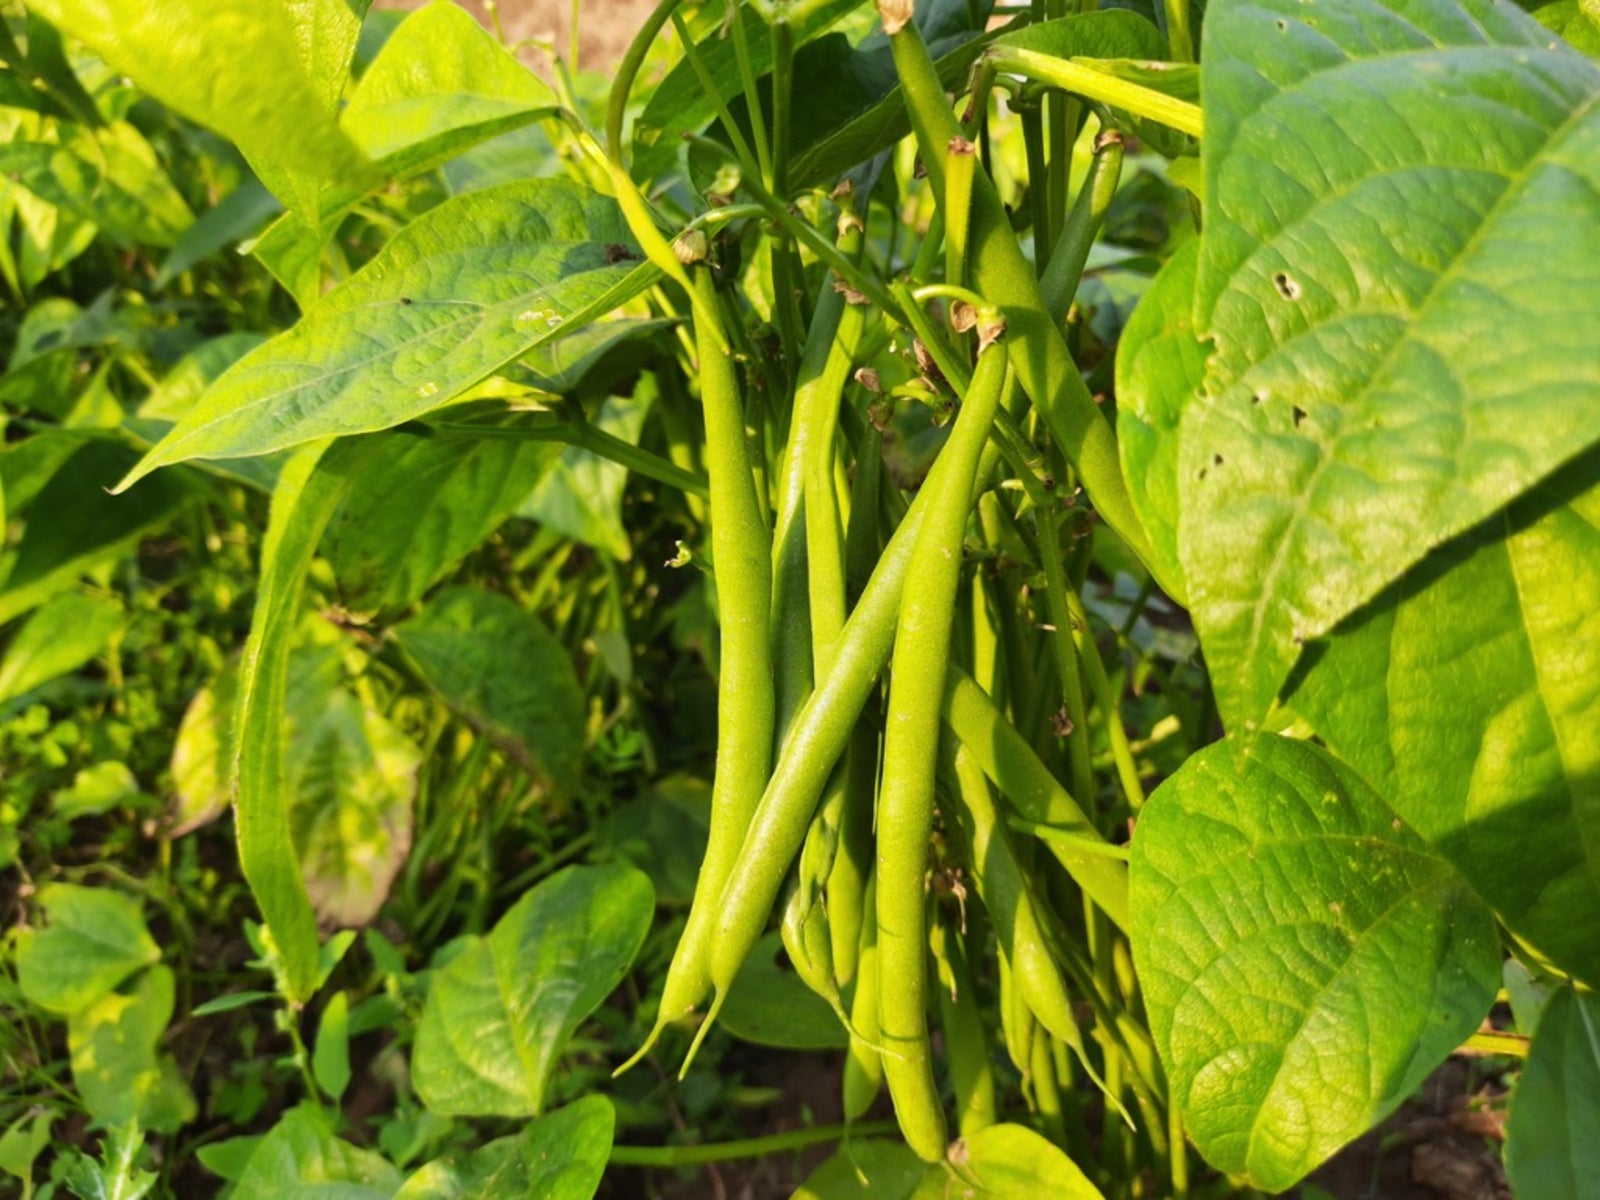 Green beans growing on a plant